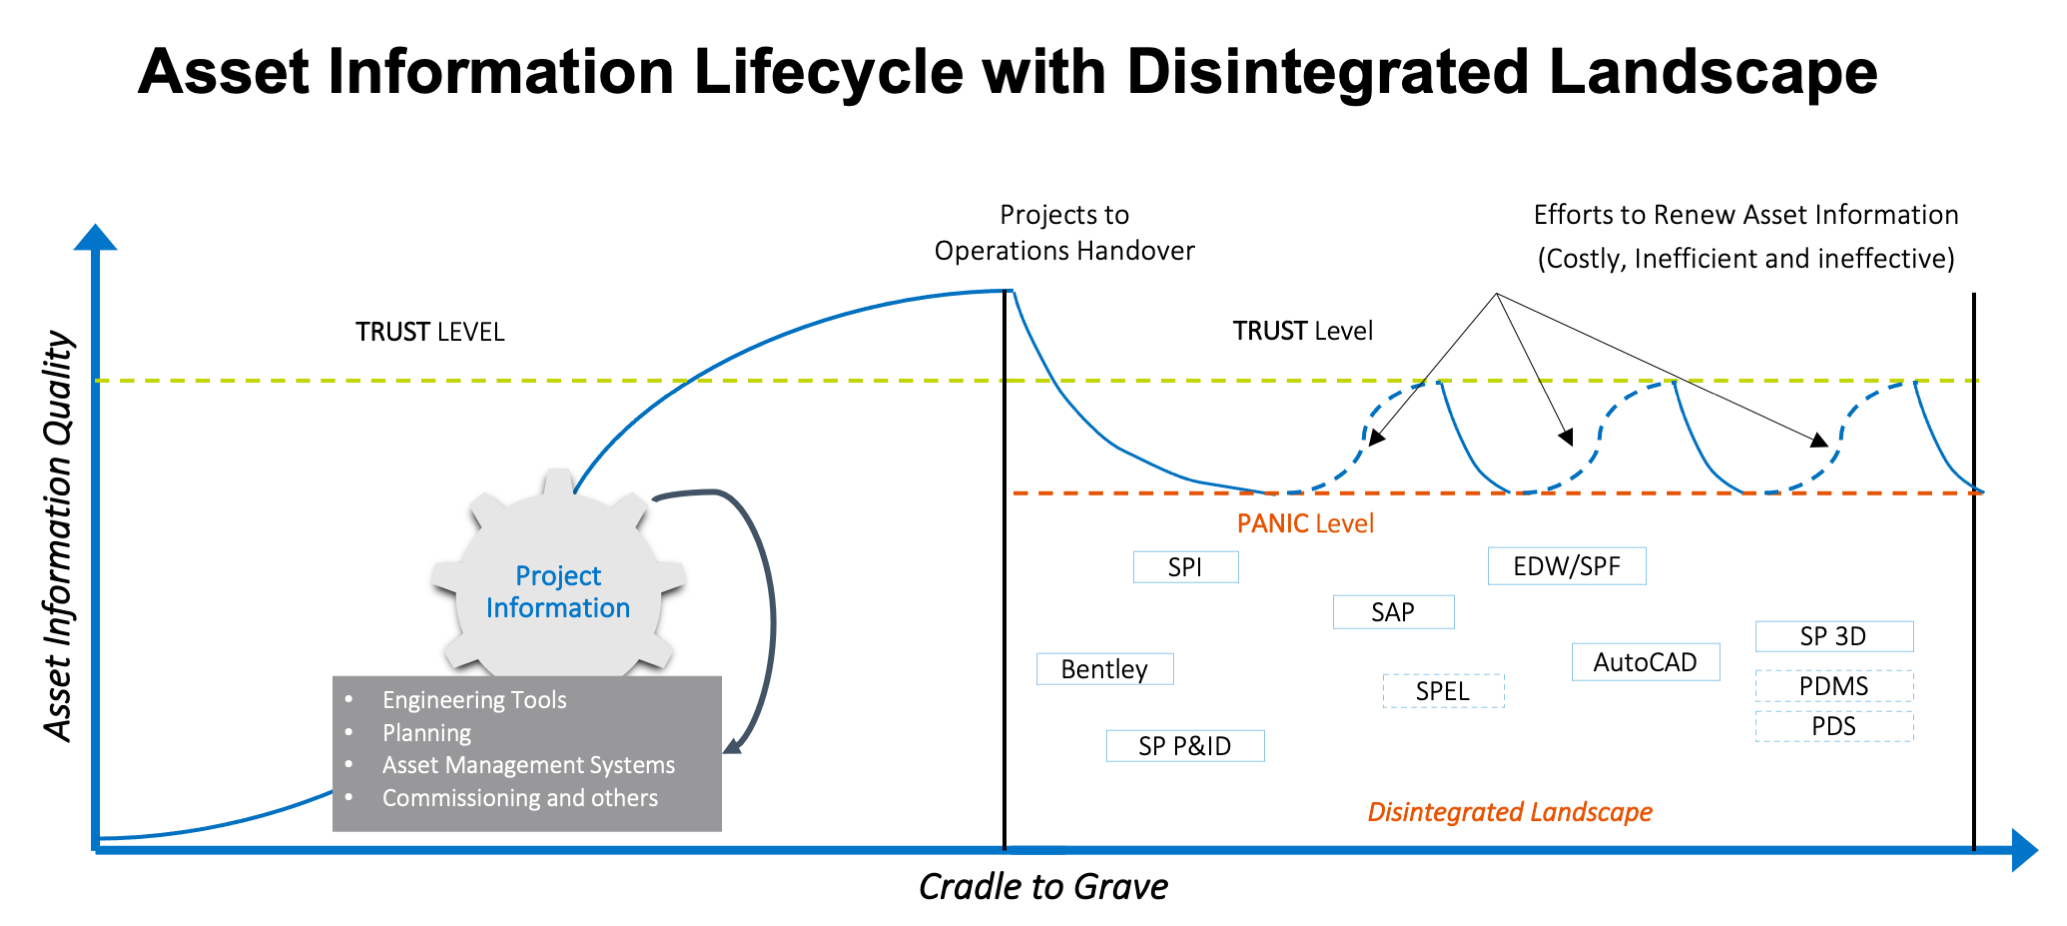 Asset Information Lifecycle